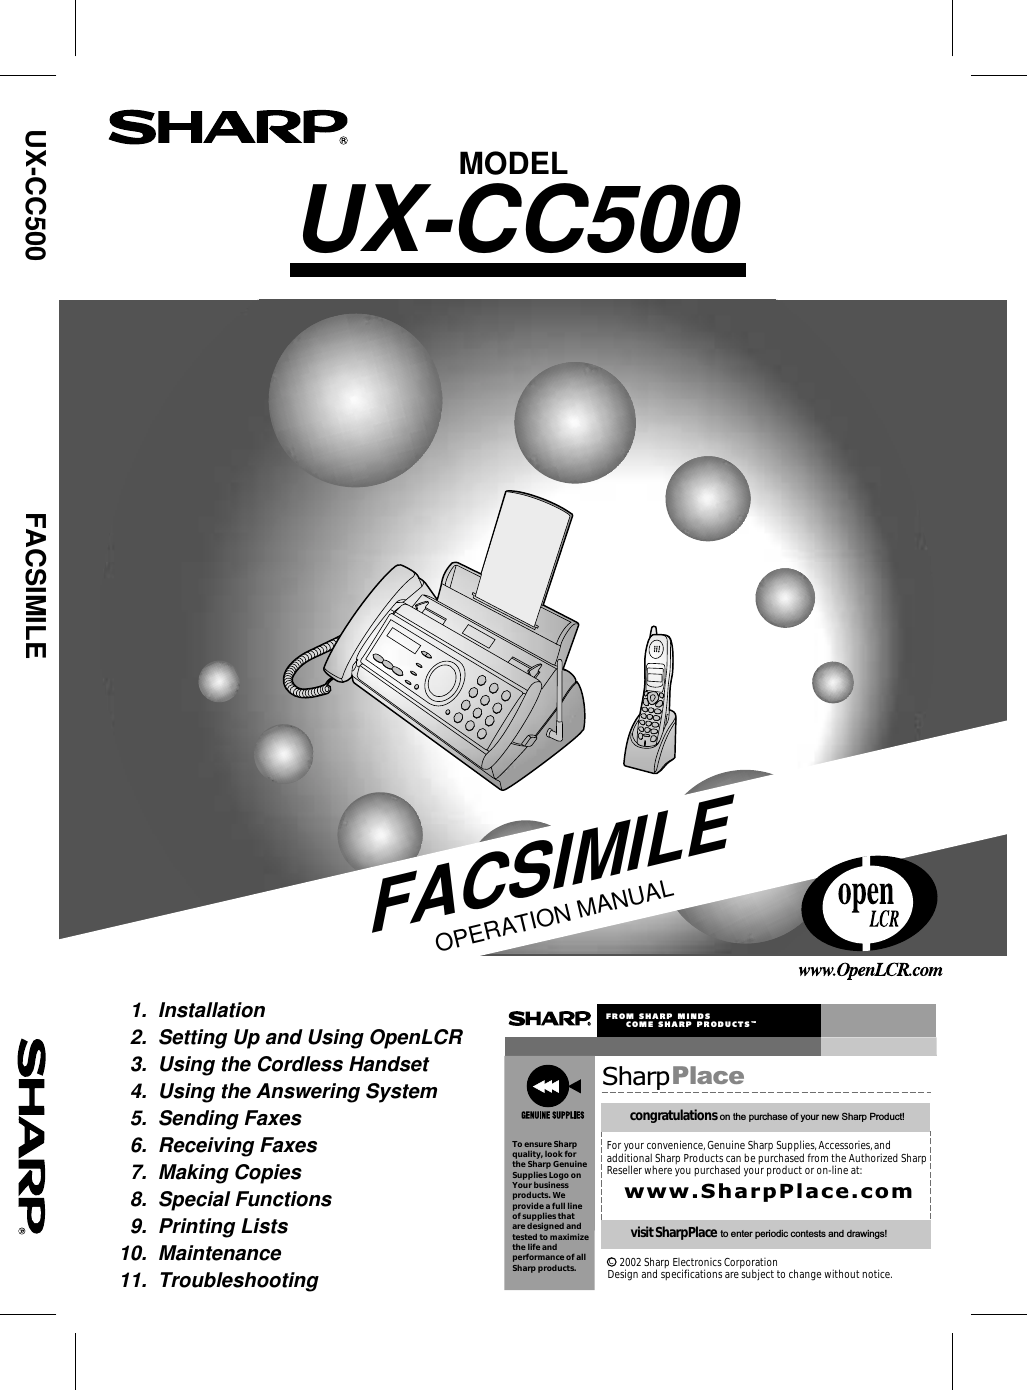 MODELUX-CC500FACSIMILEOPERATION MANUAL  1.  Installation     2.  Setting Up and Using OpenLCR  3.  Using the Cordless Handset  4.  Using the Answering System  5.  Sending Faxes  6.  Receiving Faxes  7.  Making Copies  8.  Special Functions  9.  Printing Lists10.  Maintenance11.  TroubleshootingUX-CC500     FACSIMILE SharpPlacecongratulations on the purchase of your new Sharp Product!For your convenience, Genuine Sharp Supplies, Accessories, andadditional Sharp Products can be purchased from the Authorized SharpReseller where you purchased your product or on-line at:www.SharpPlace.comvisit SharpPlace to enter periodic contests and drawings!     2002 Sharp Electronics CorporationDesign and specifications are subject to change without notice.To ensure Sharpquality, look for  the Sharp GenuineSupplies Logo onYour businessproducts. We provide a full lineof supplies thatare designed andtested to maximizethe life andperformance of allSharp products.FROM SHARP MINDS     COME SHARP PRODUCTSTMC